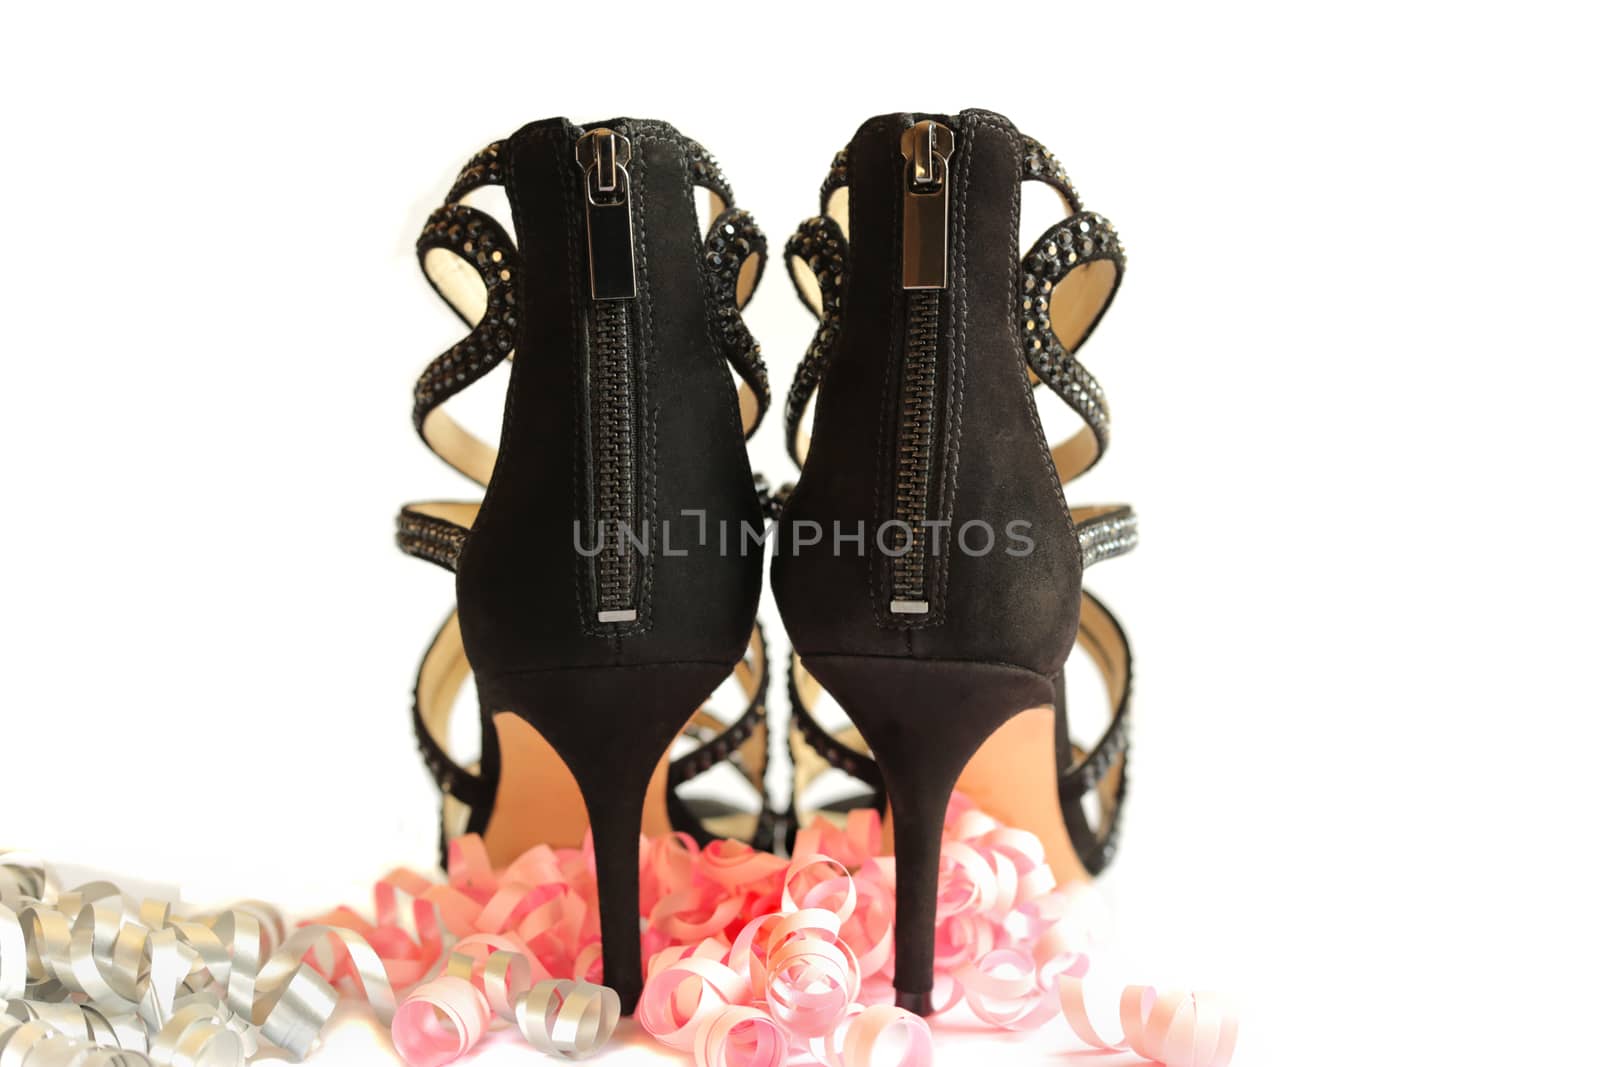 pair of black high heels shoes with pink party streamers. by NelliPolk